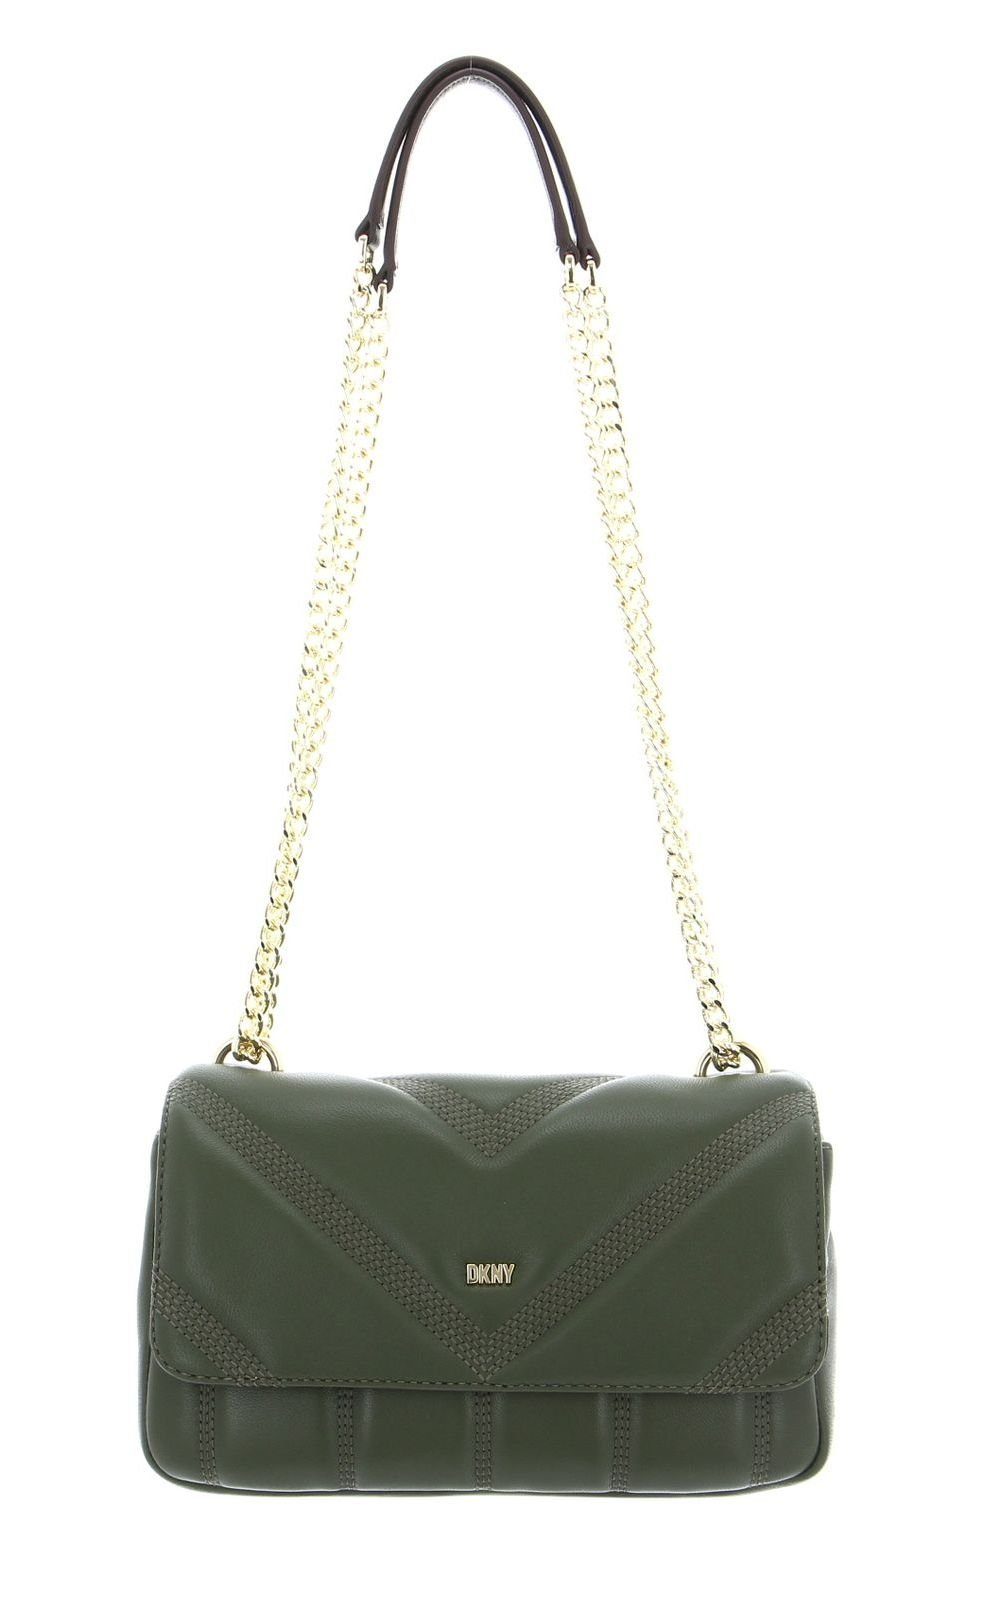 Becca Army Green Schultertasche DKNY